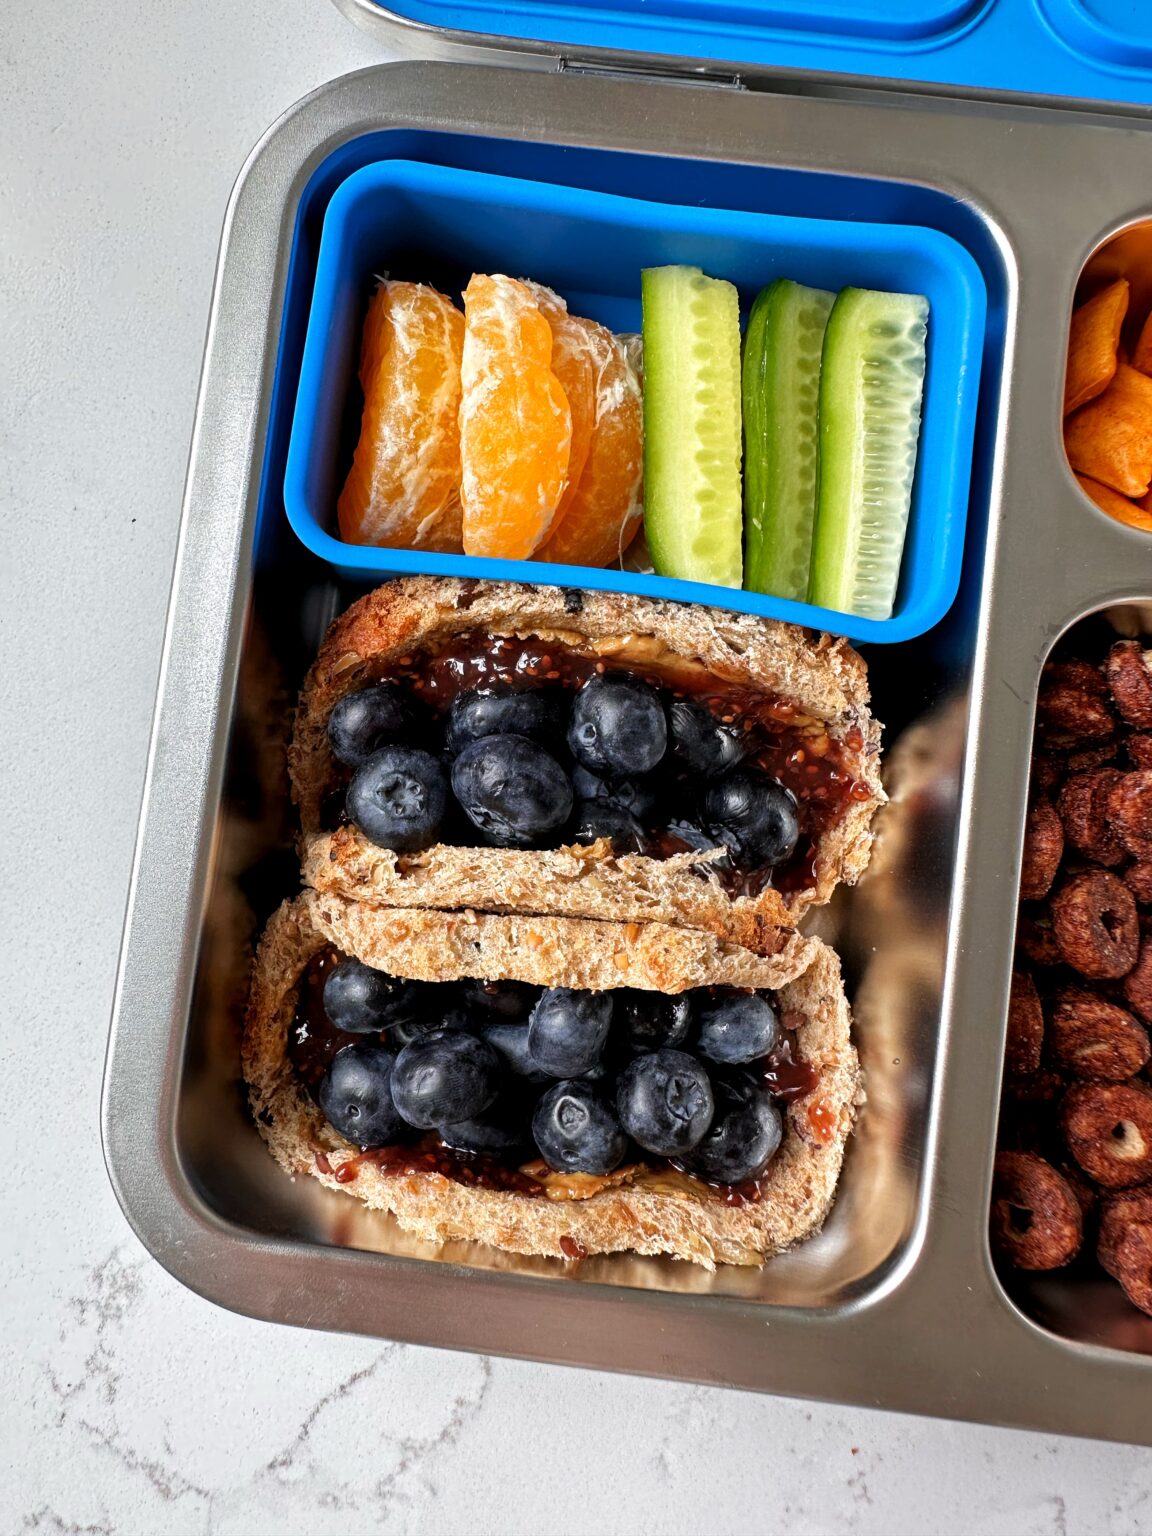 20+ Easy School Lunch Ideas for Toddlers - rachLmansfield